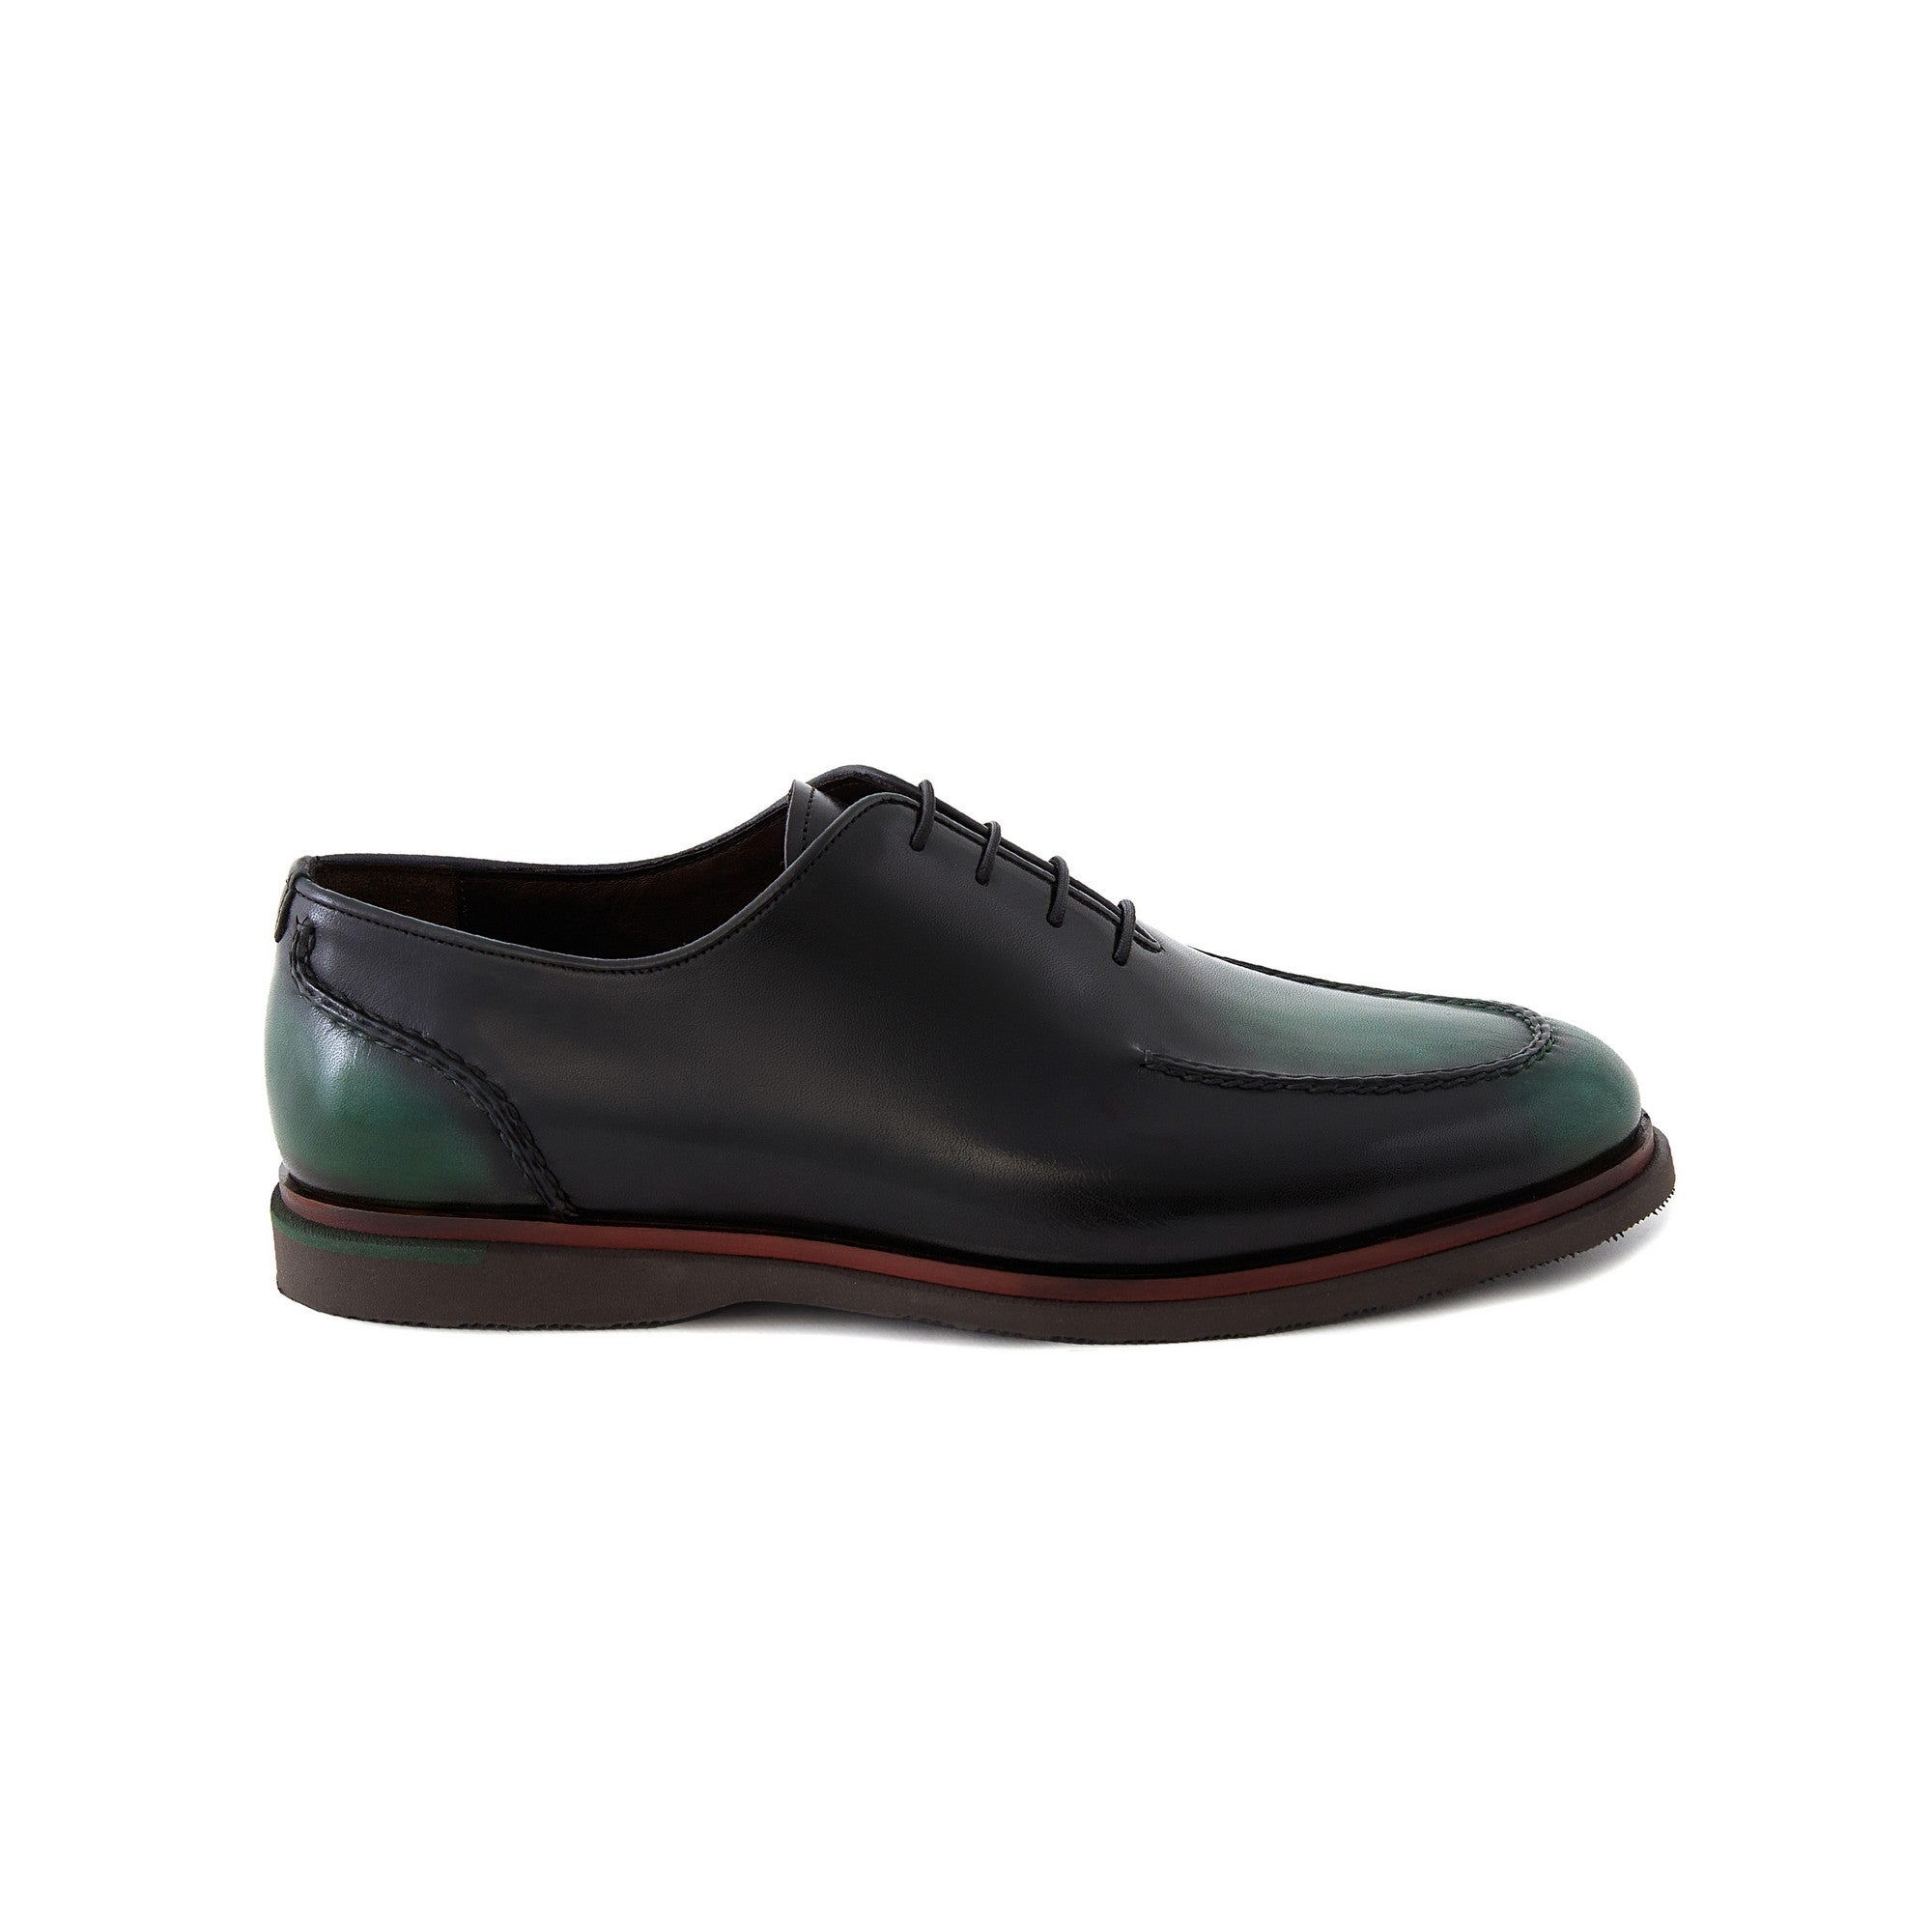 Men's Calf Leather Lace Up Handmade Oxford M7032